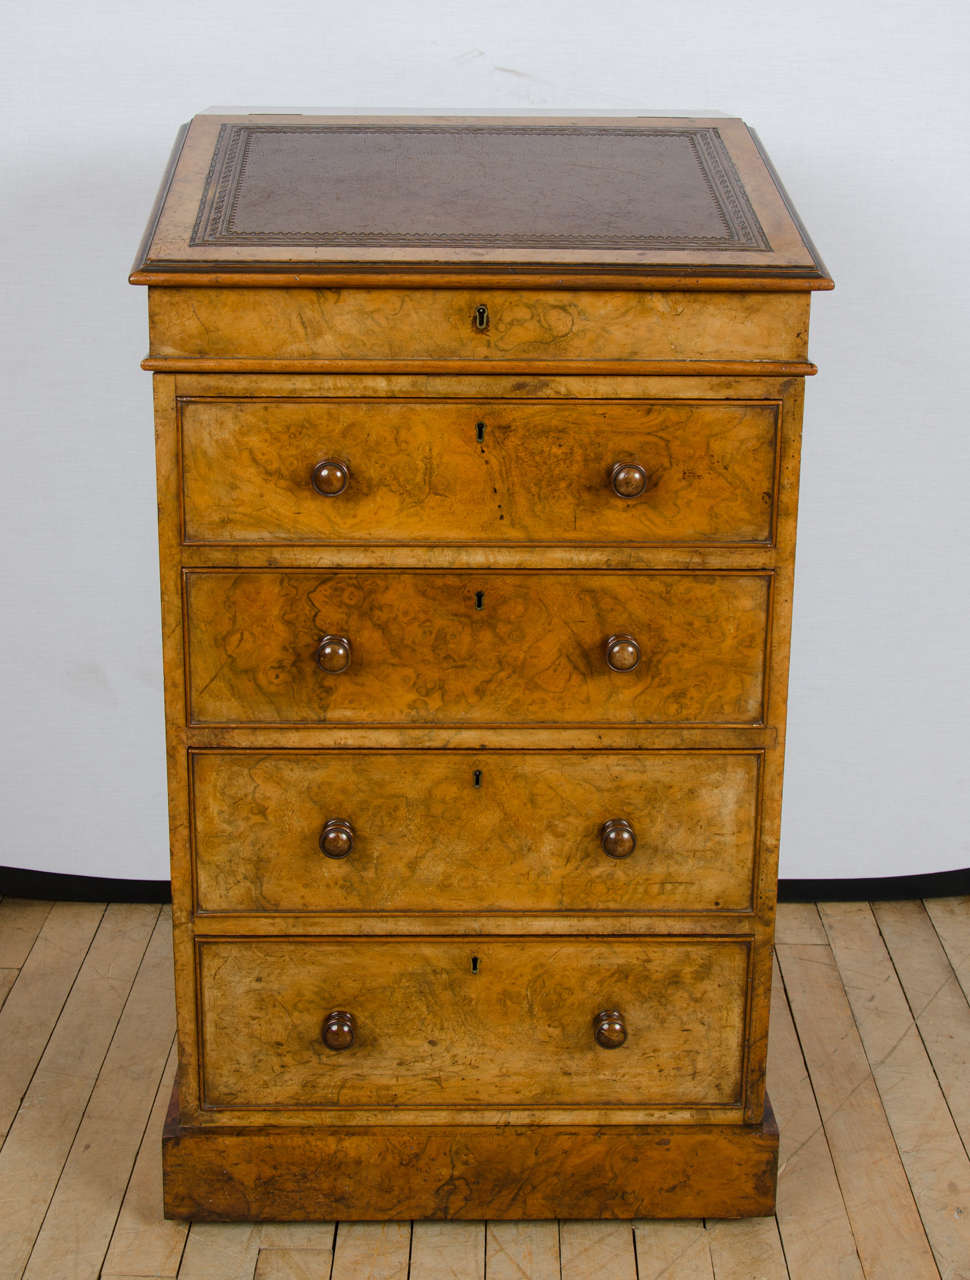 A superb quality mid-19th century burr walnut Davenport signed with London makers Hindley & Sons, 154 Oxford Street. The writing slope on the Davenport twists around to allow for leg room and the drawers are all cedar lined, both attributes to a